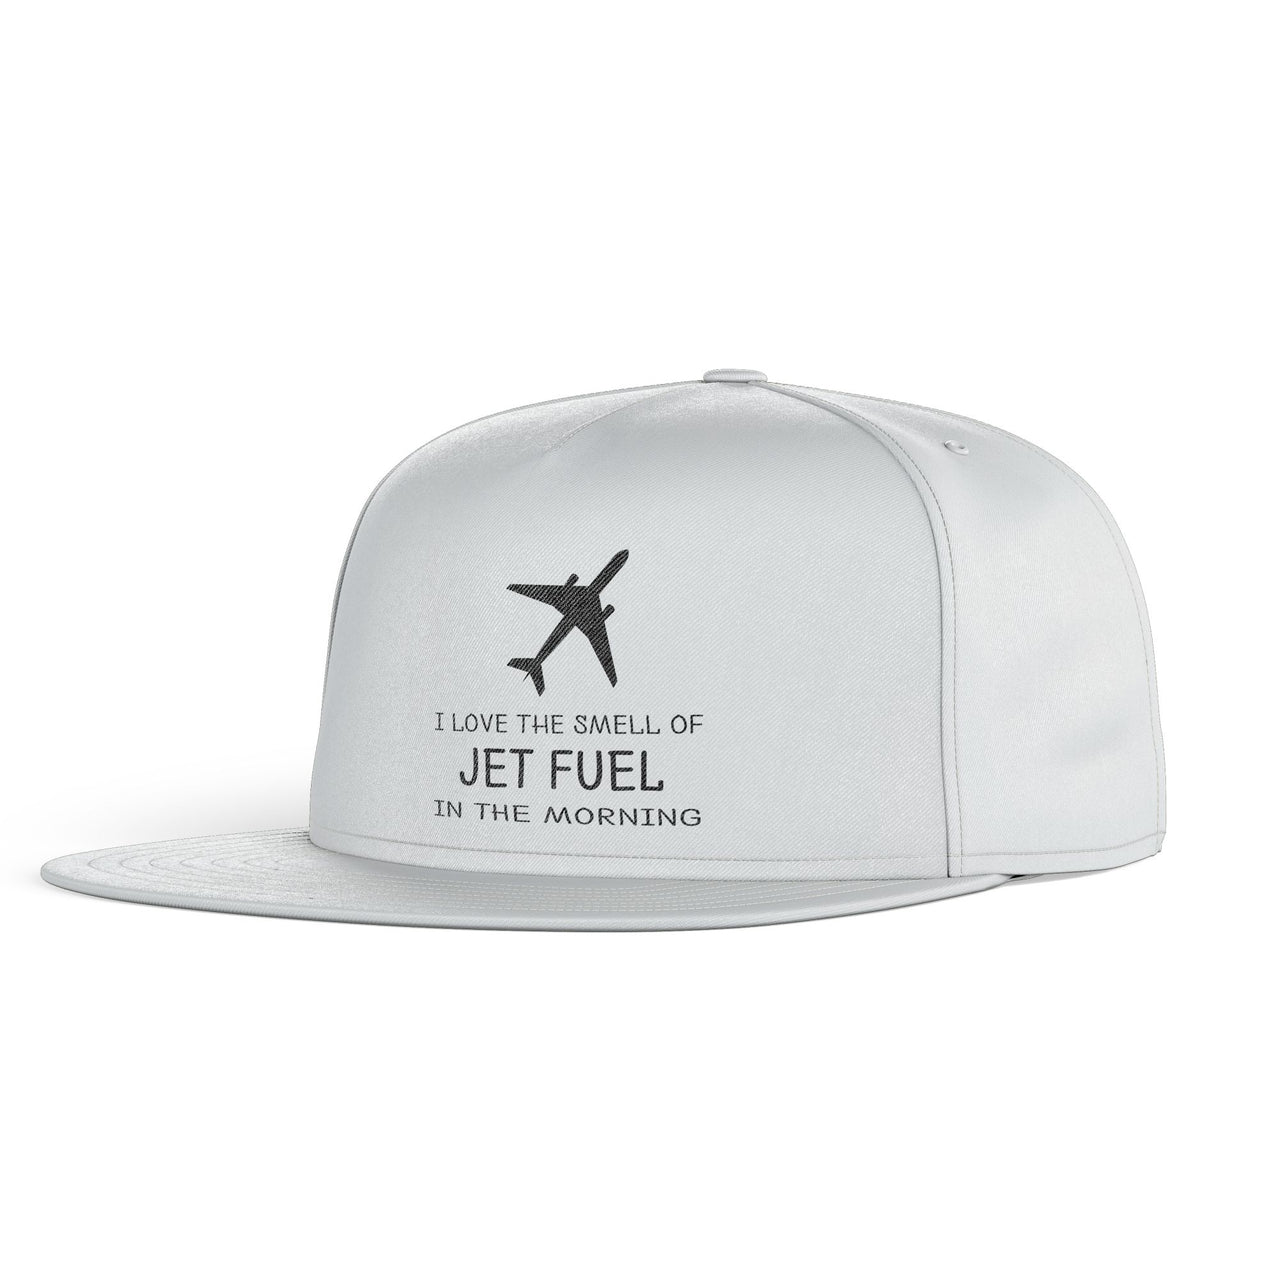 I Love The Smell Of Jet Fuel In The Morning Designed Snapback Caps & Hats